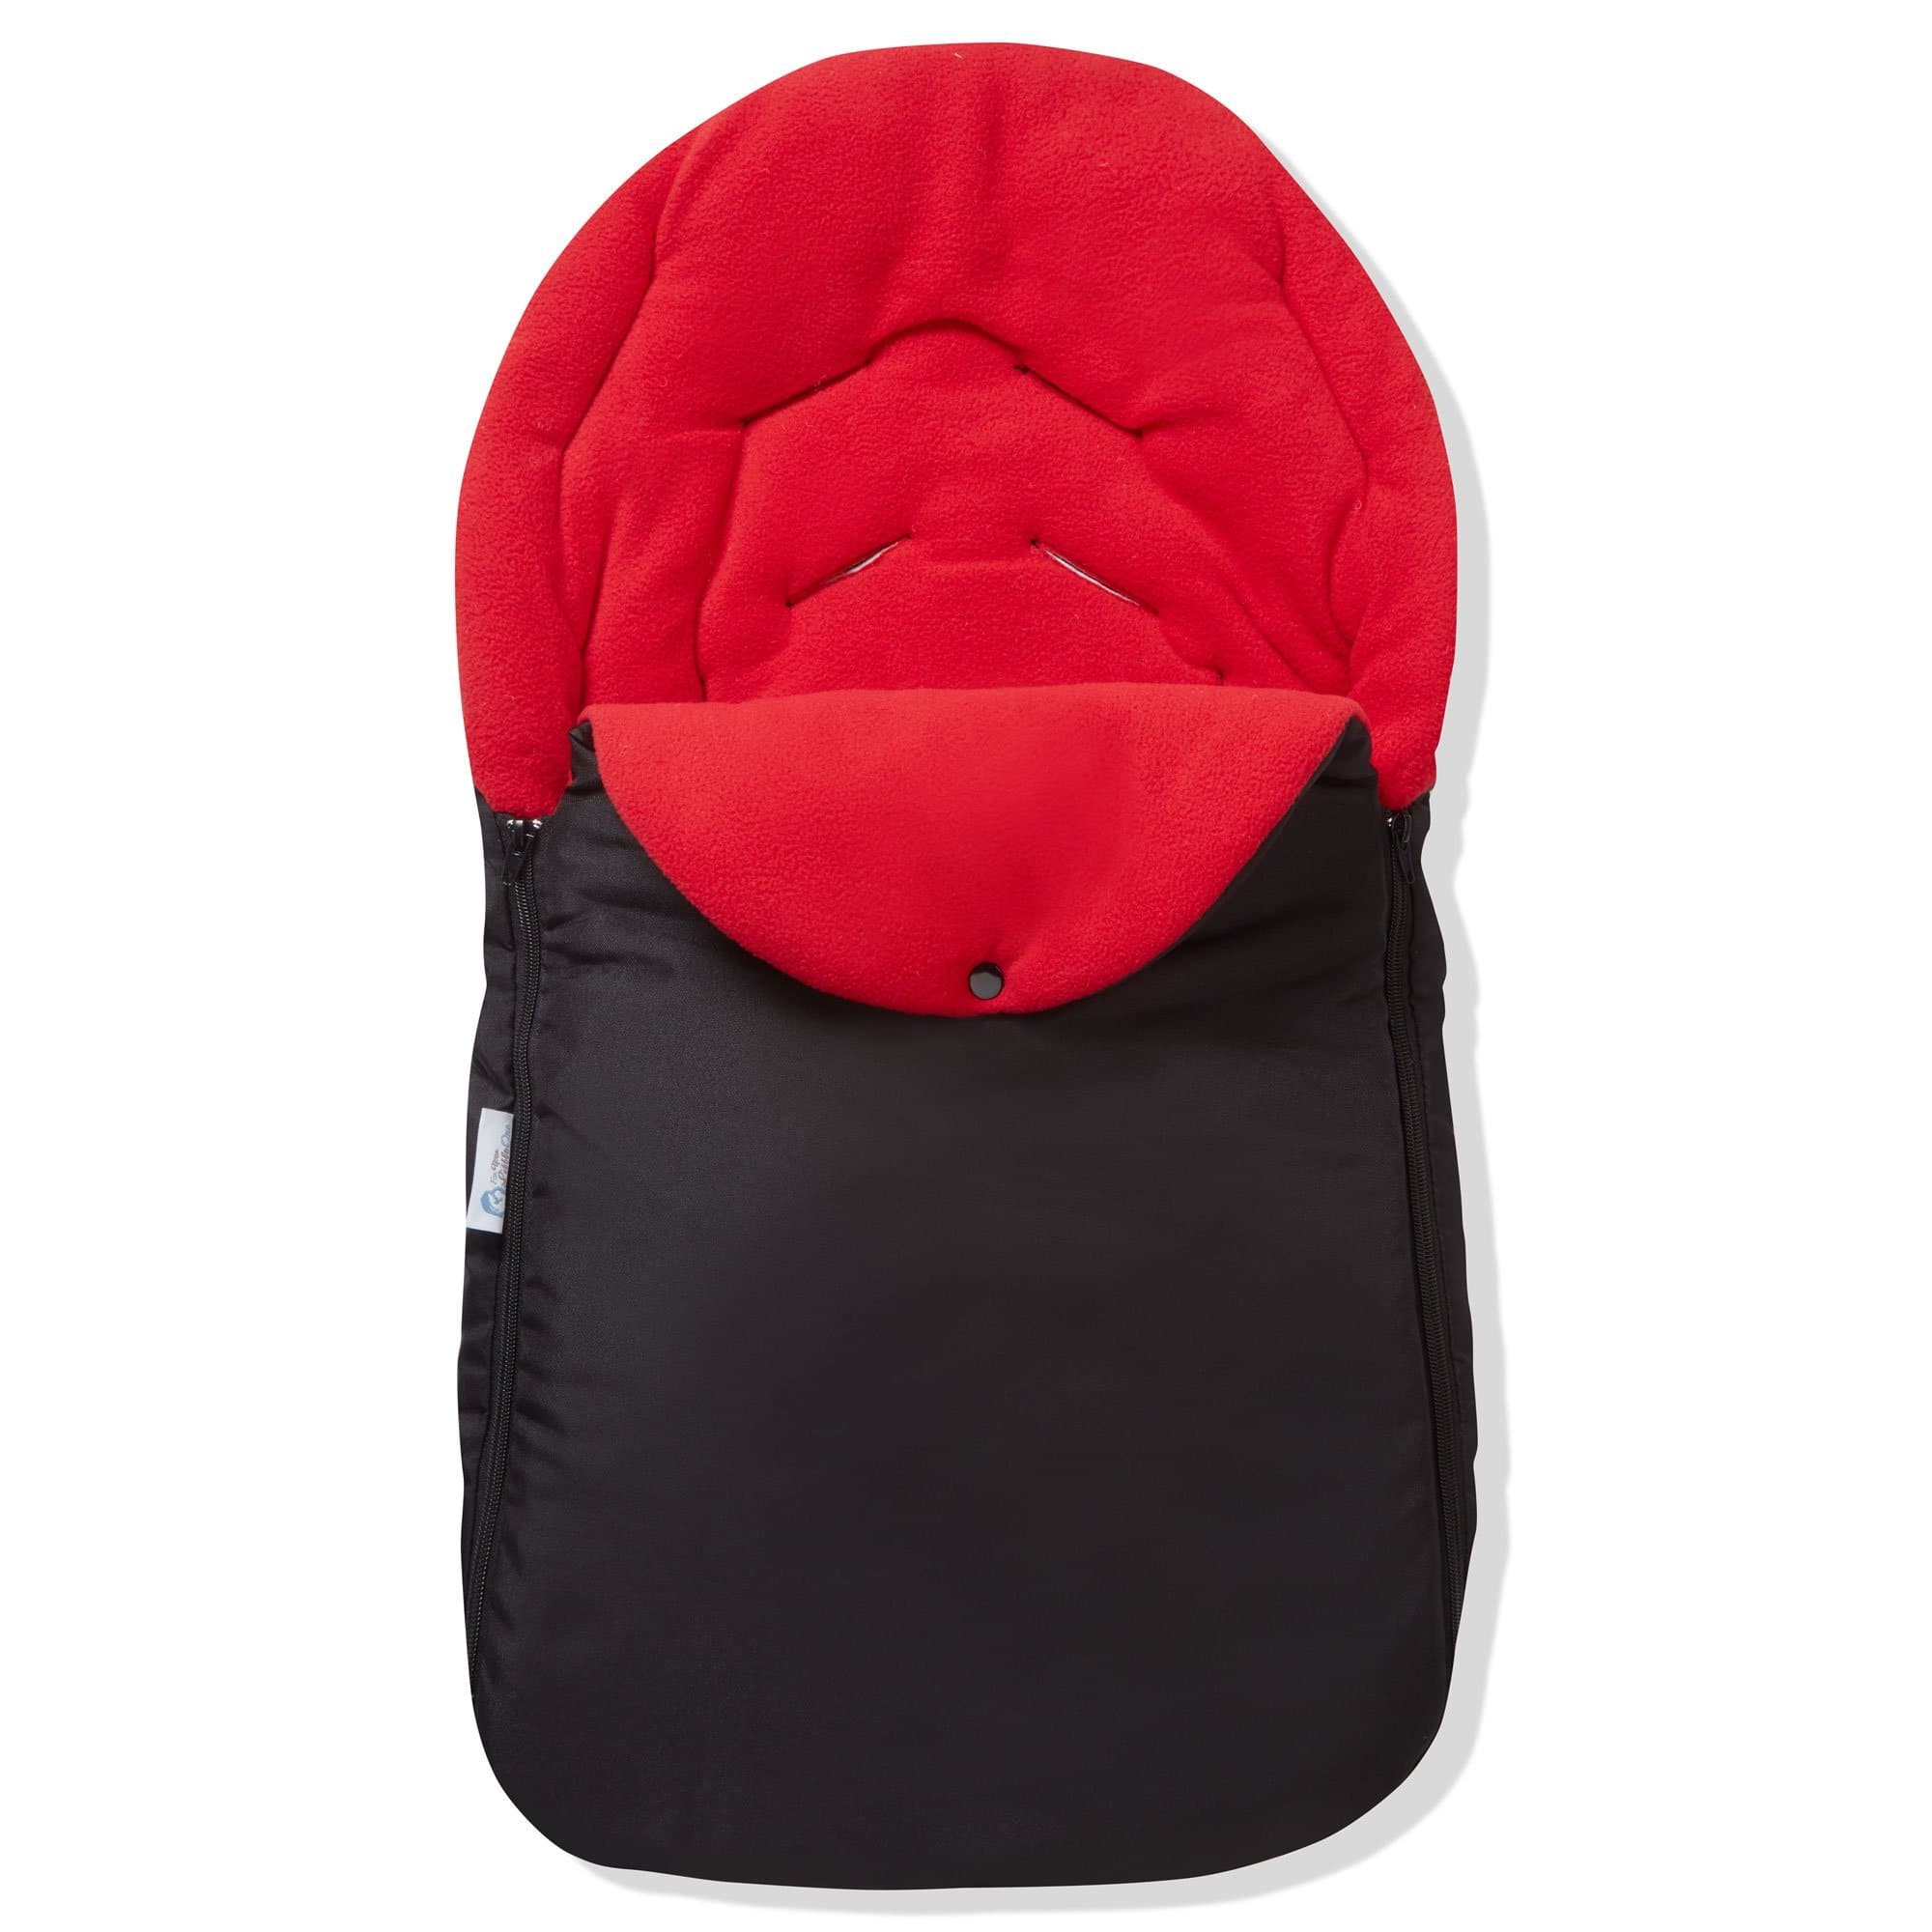 Car Seat Footmuff / Cosy Toes Compatible with Infababy - For Your Little One